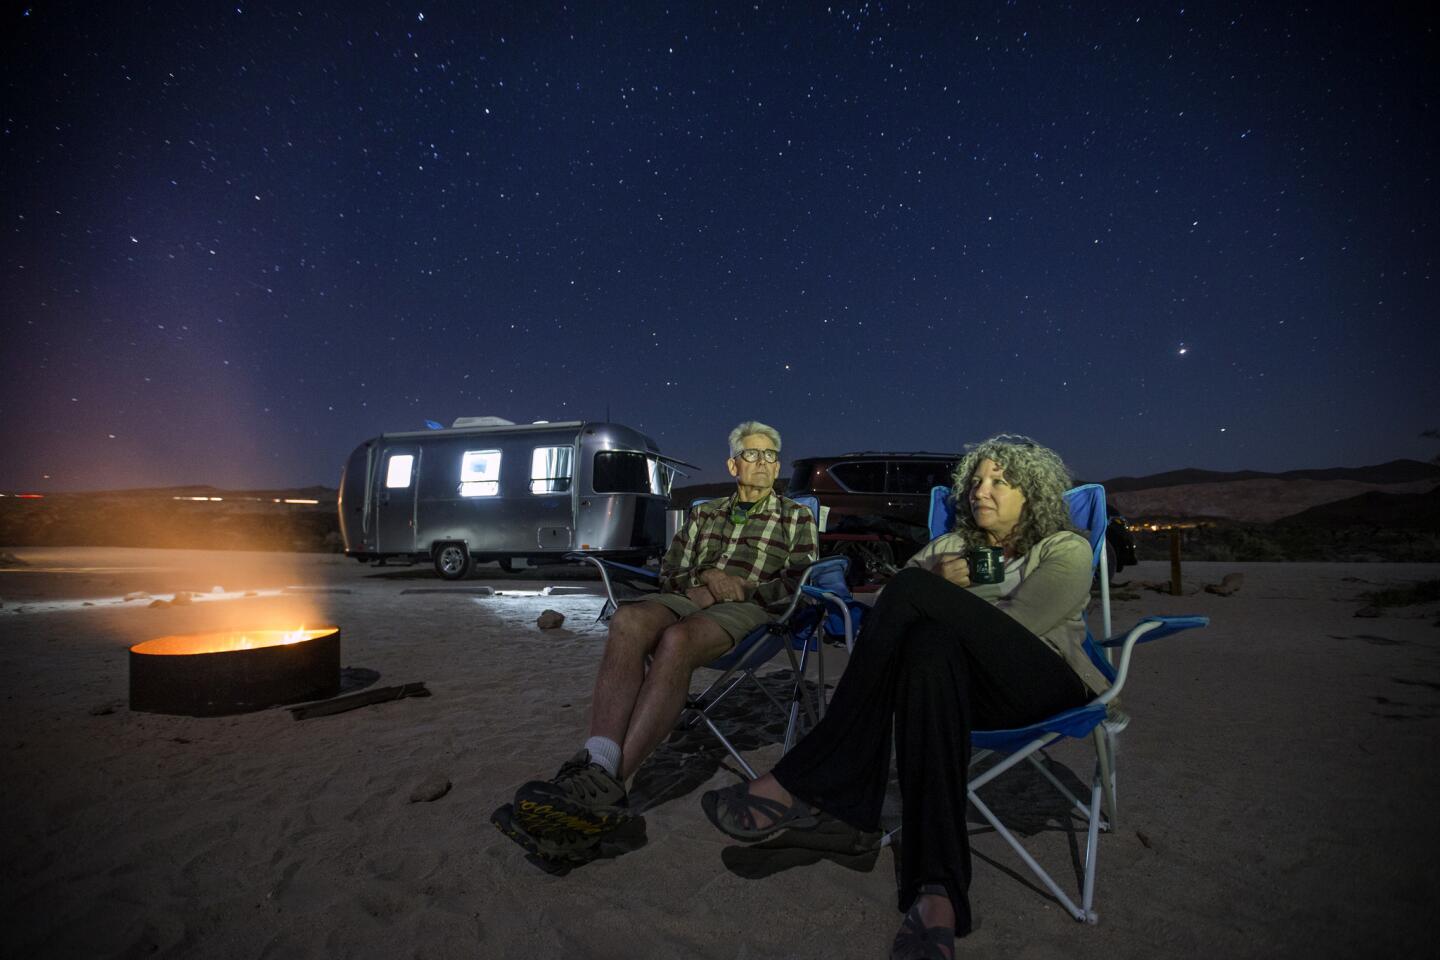 Airstream camping in the Mojave Desert